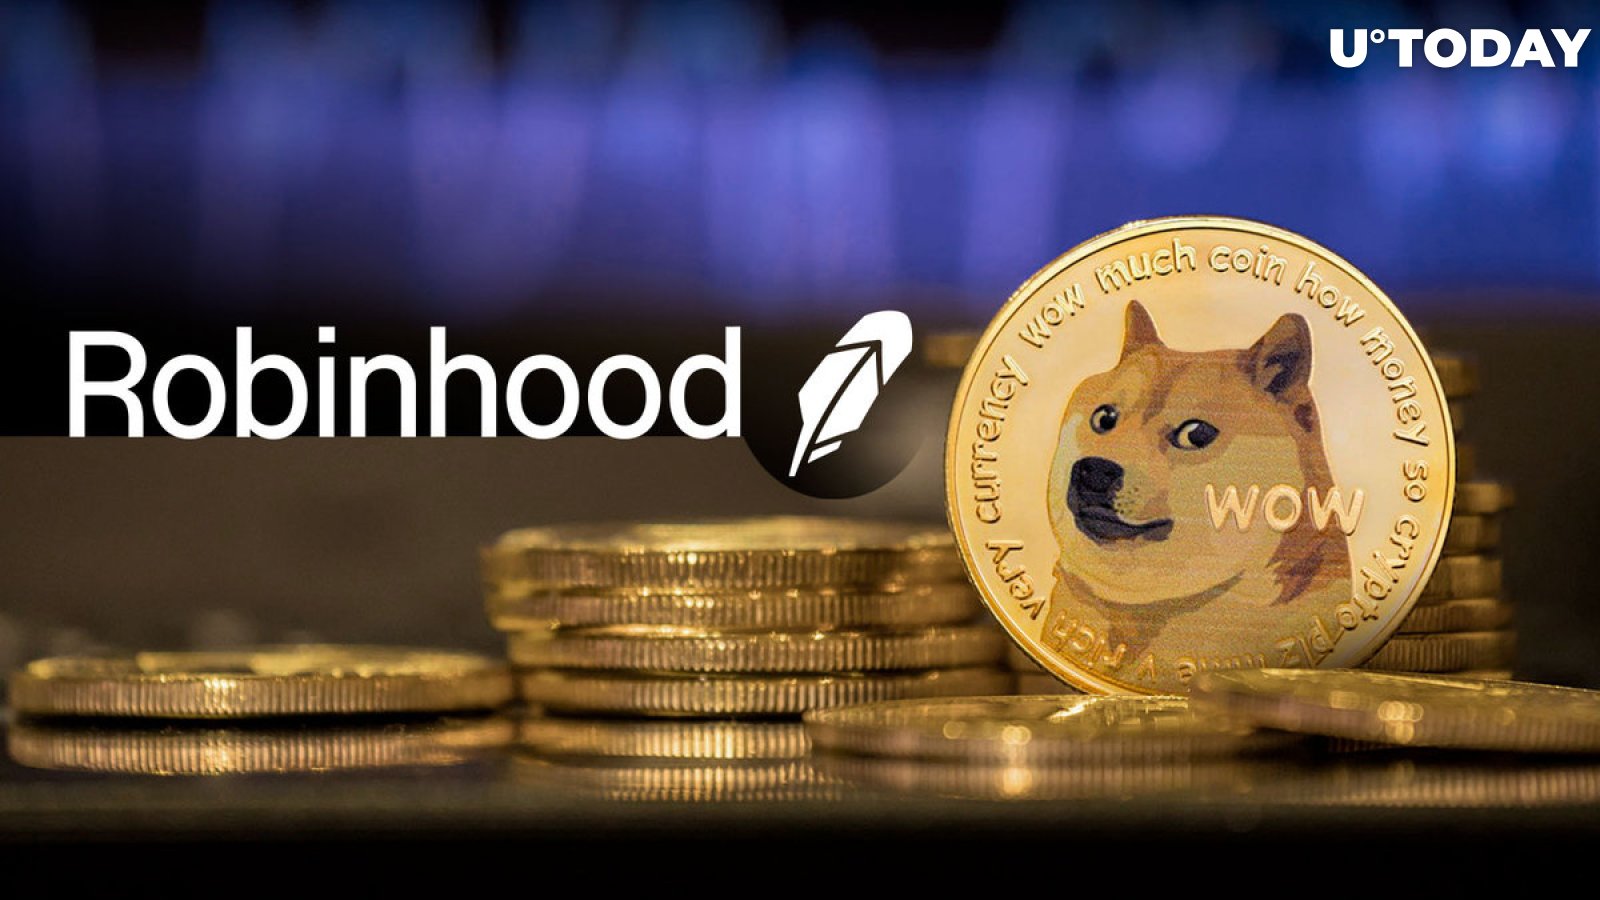 197 Million Dogecoin Purchased on Robinhood as DOGE Price Hits 3-Year High